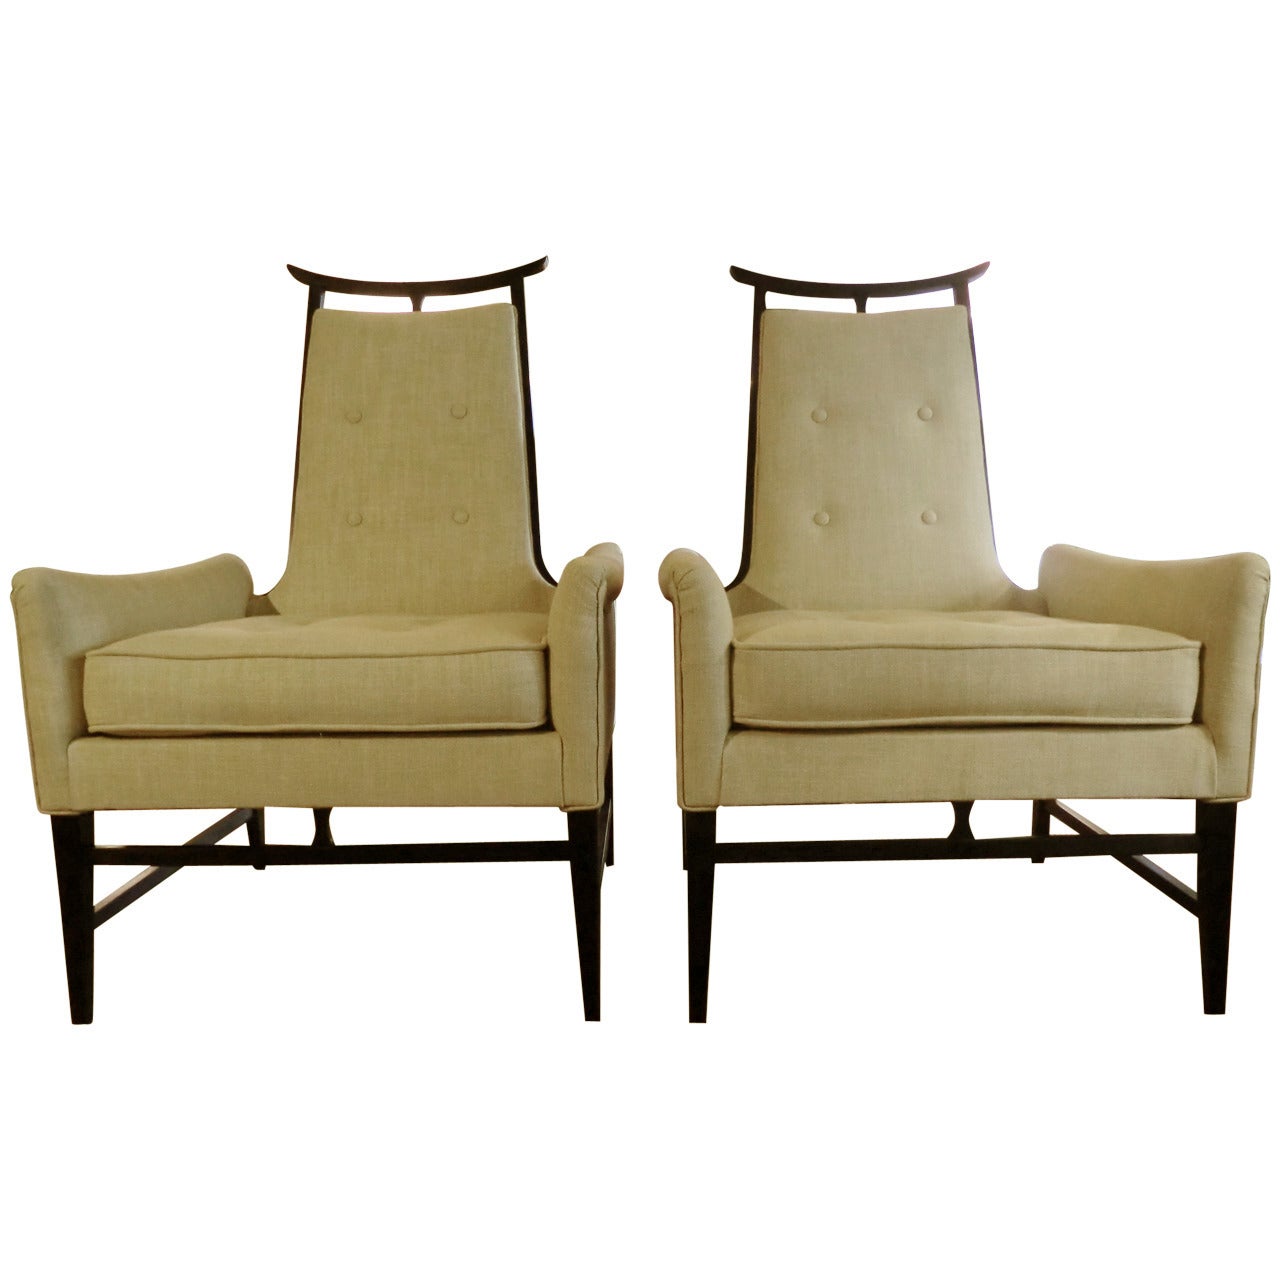 1950s "Chinoiserie" French Armchairs